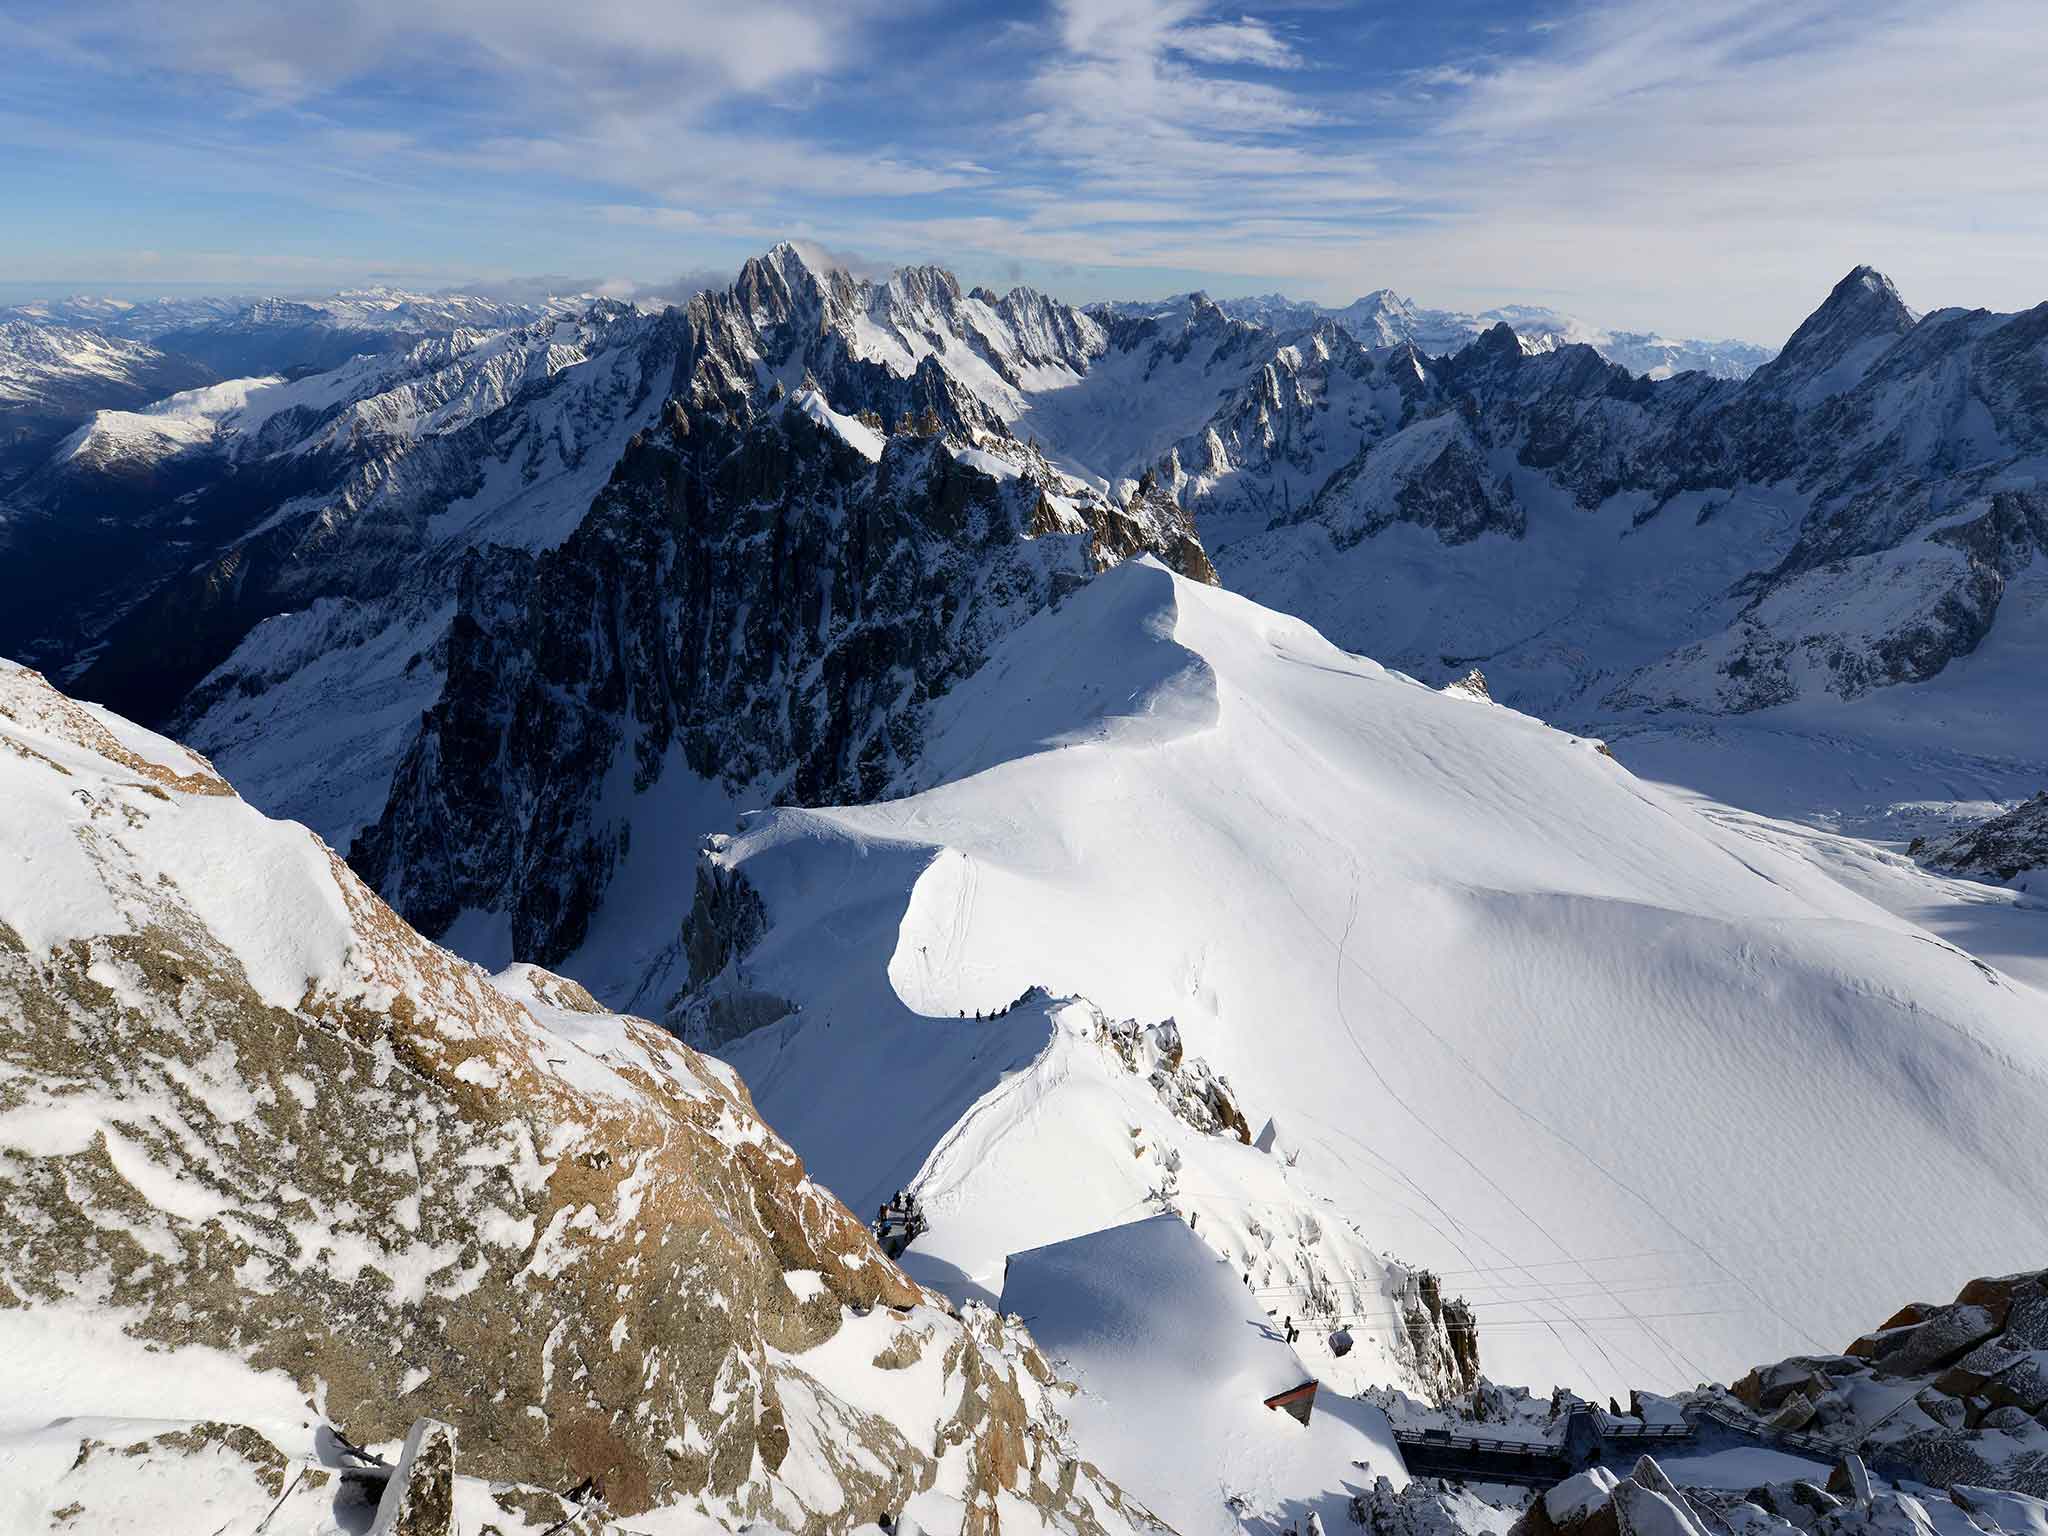 Search and rescue teams, including two helicopters, are in the area after an avalanche in the French Alps